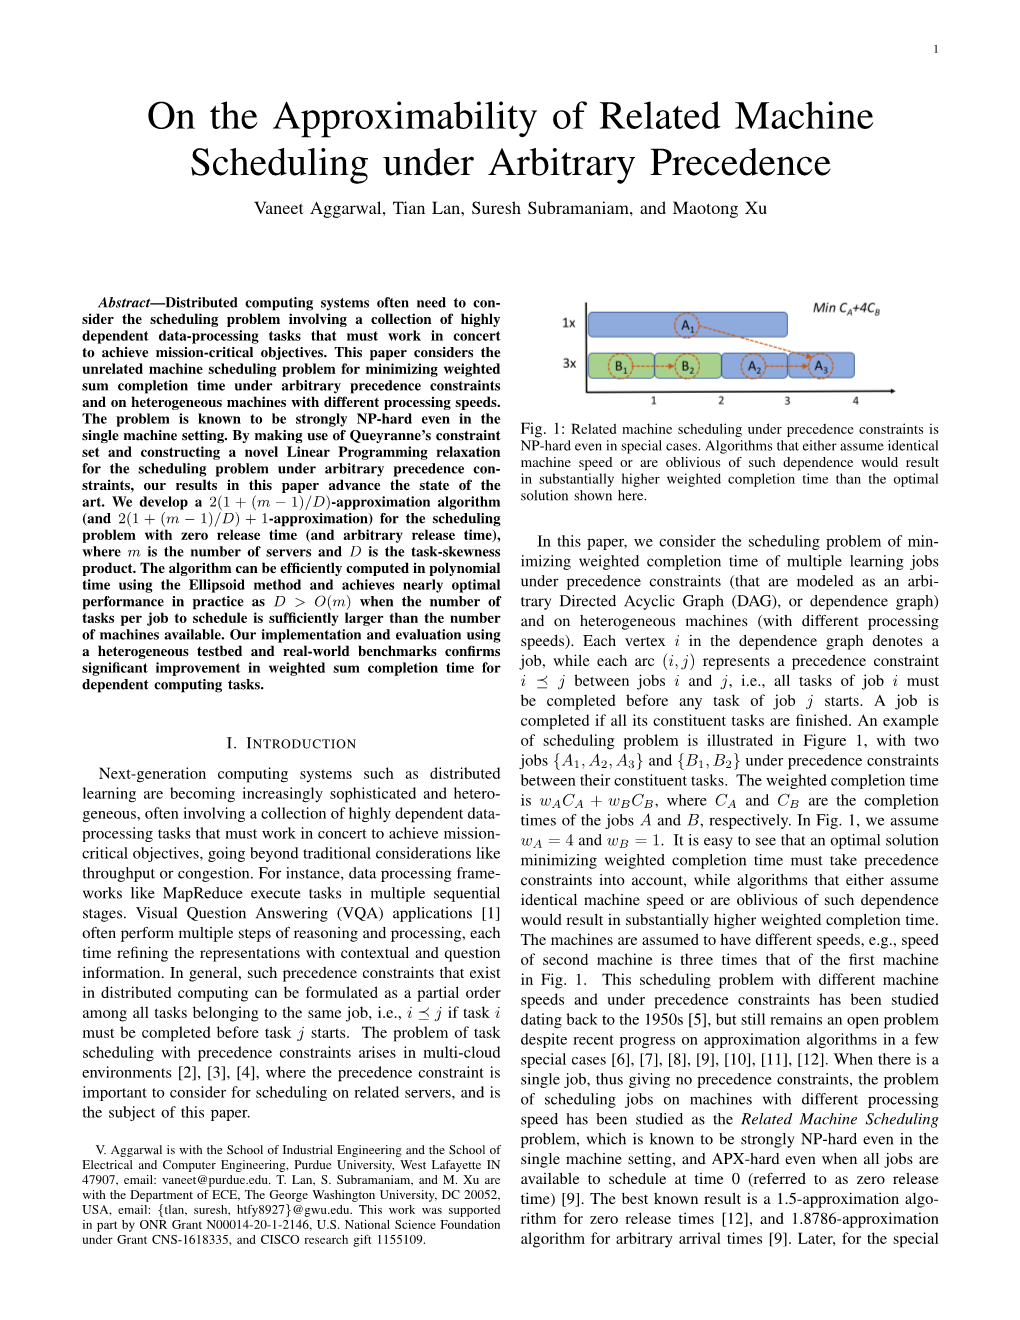 On the Approximability of Related Machine Scheduling Under Arbitrary Precedence Vaneet Aggarwal, Tian Lan, Suresh Subramaniam, and Maotong Xu